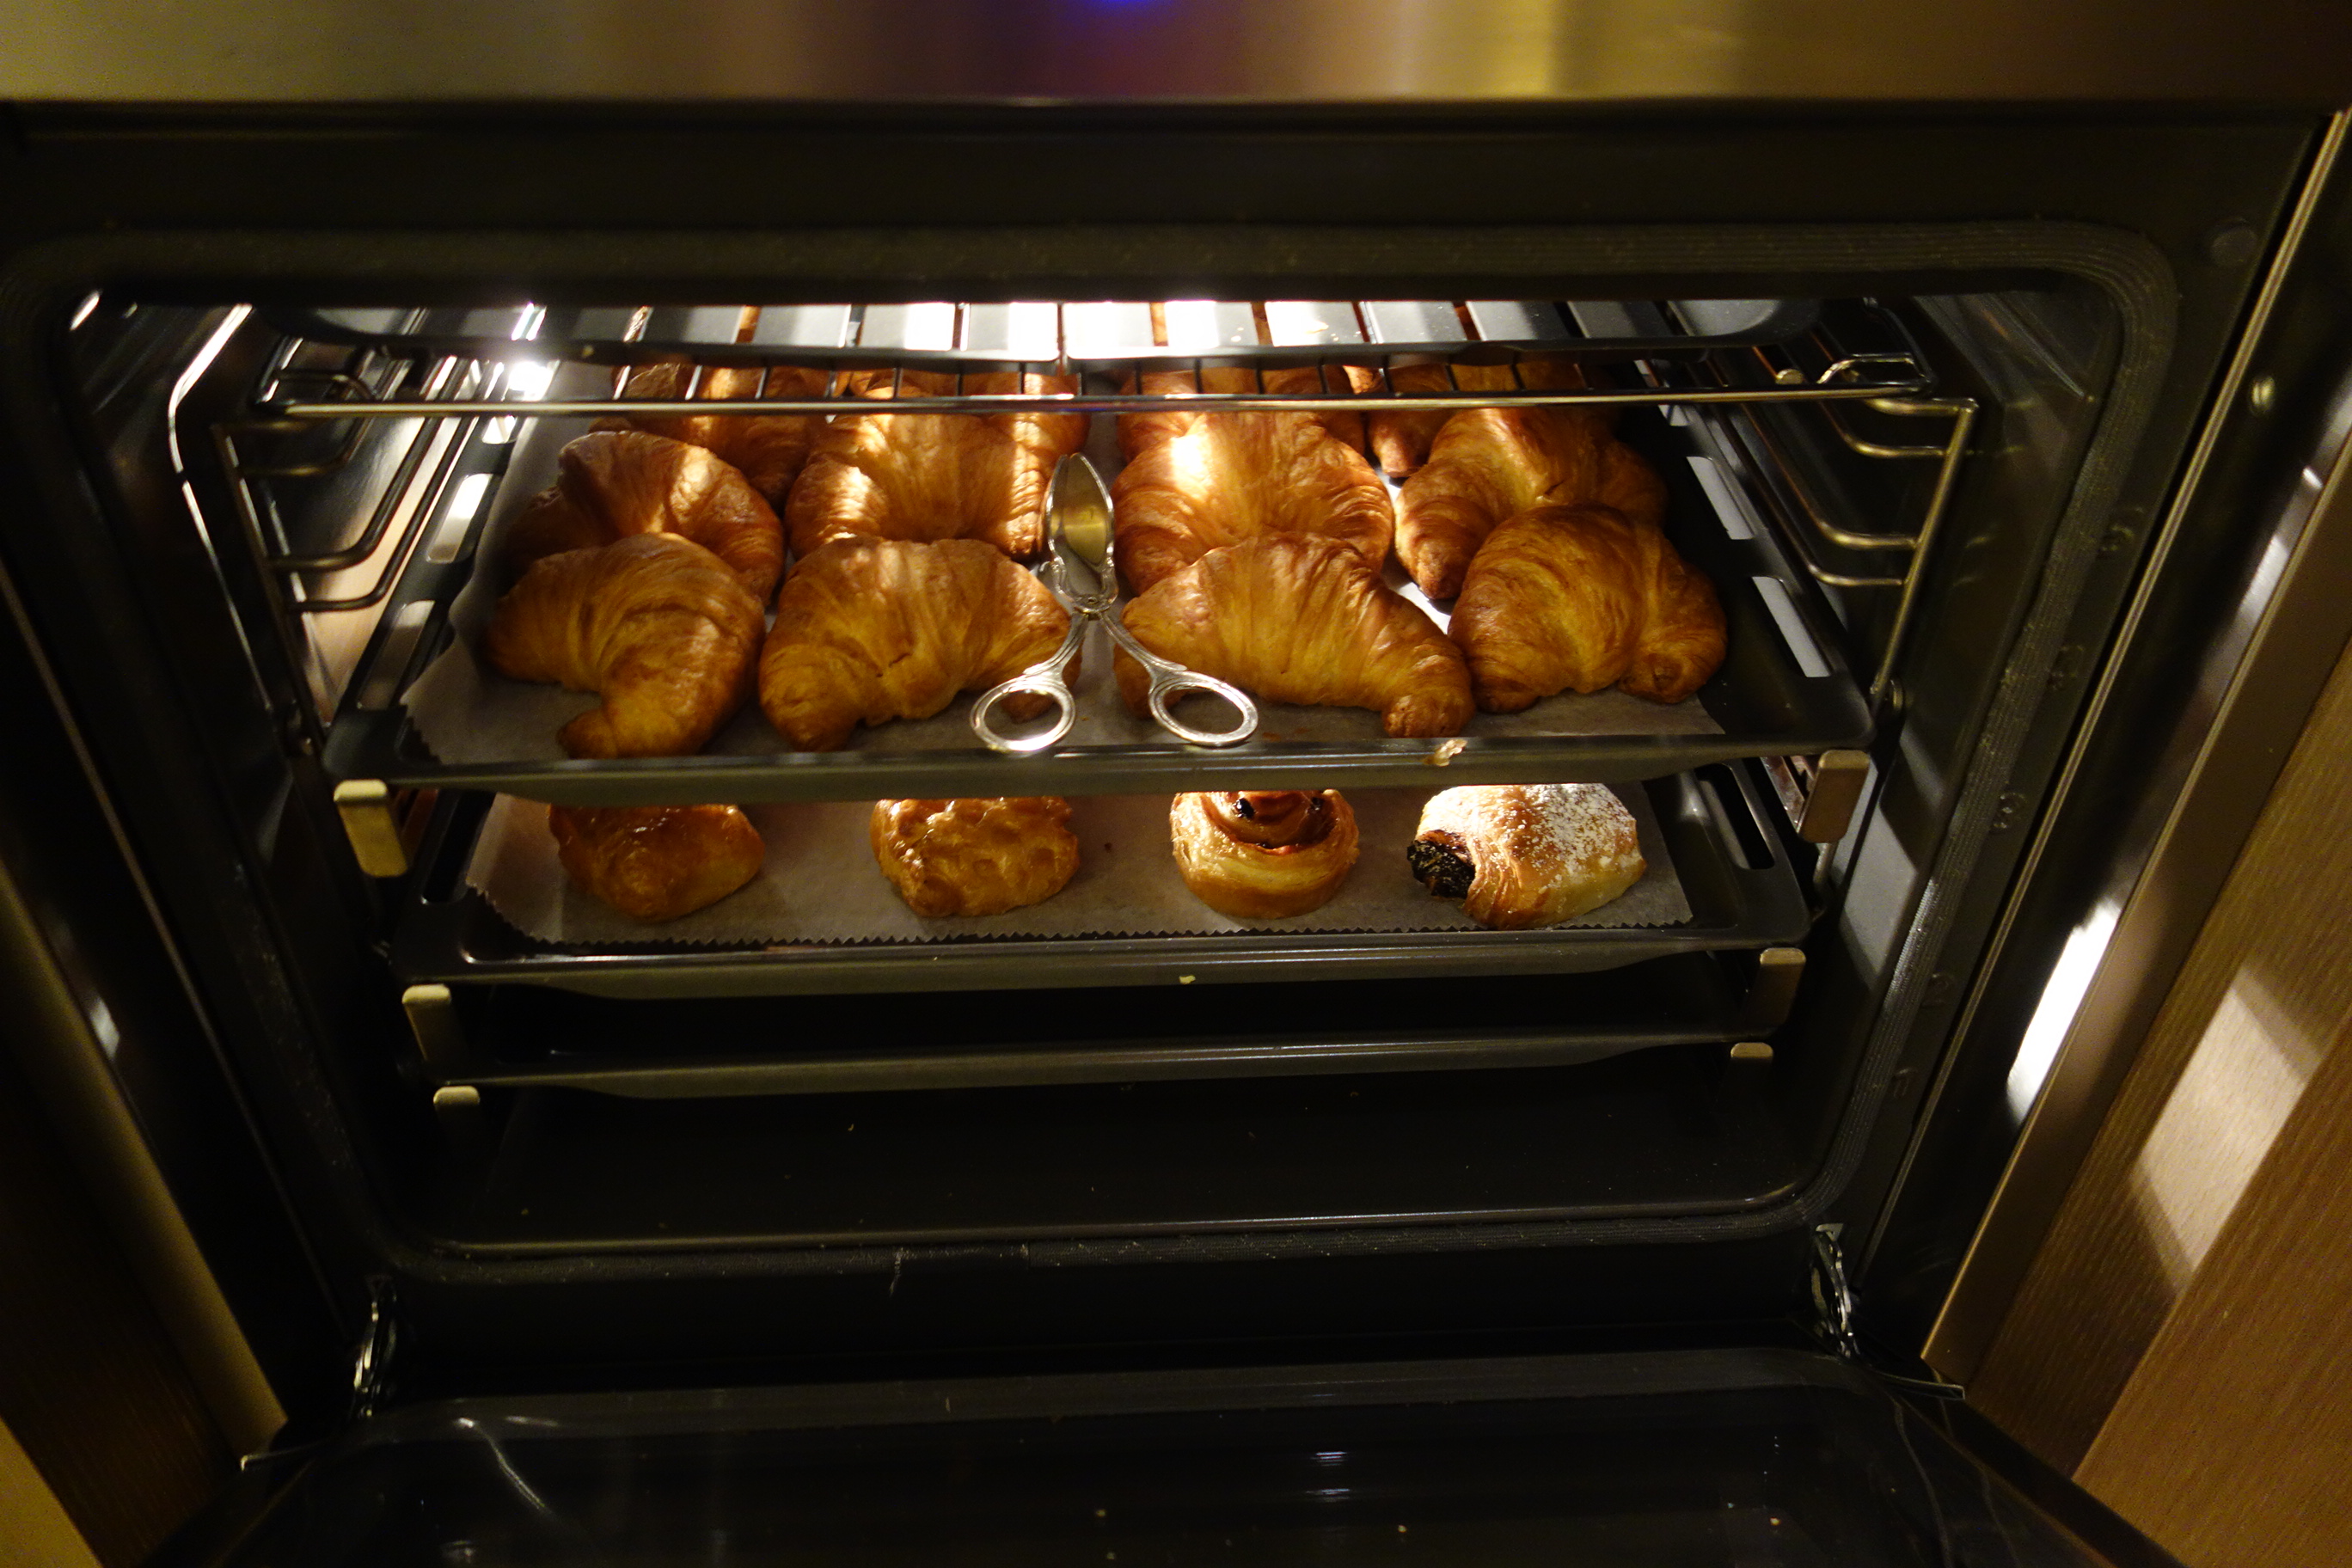 Warming ovens for pastries